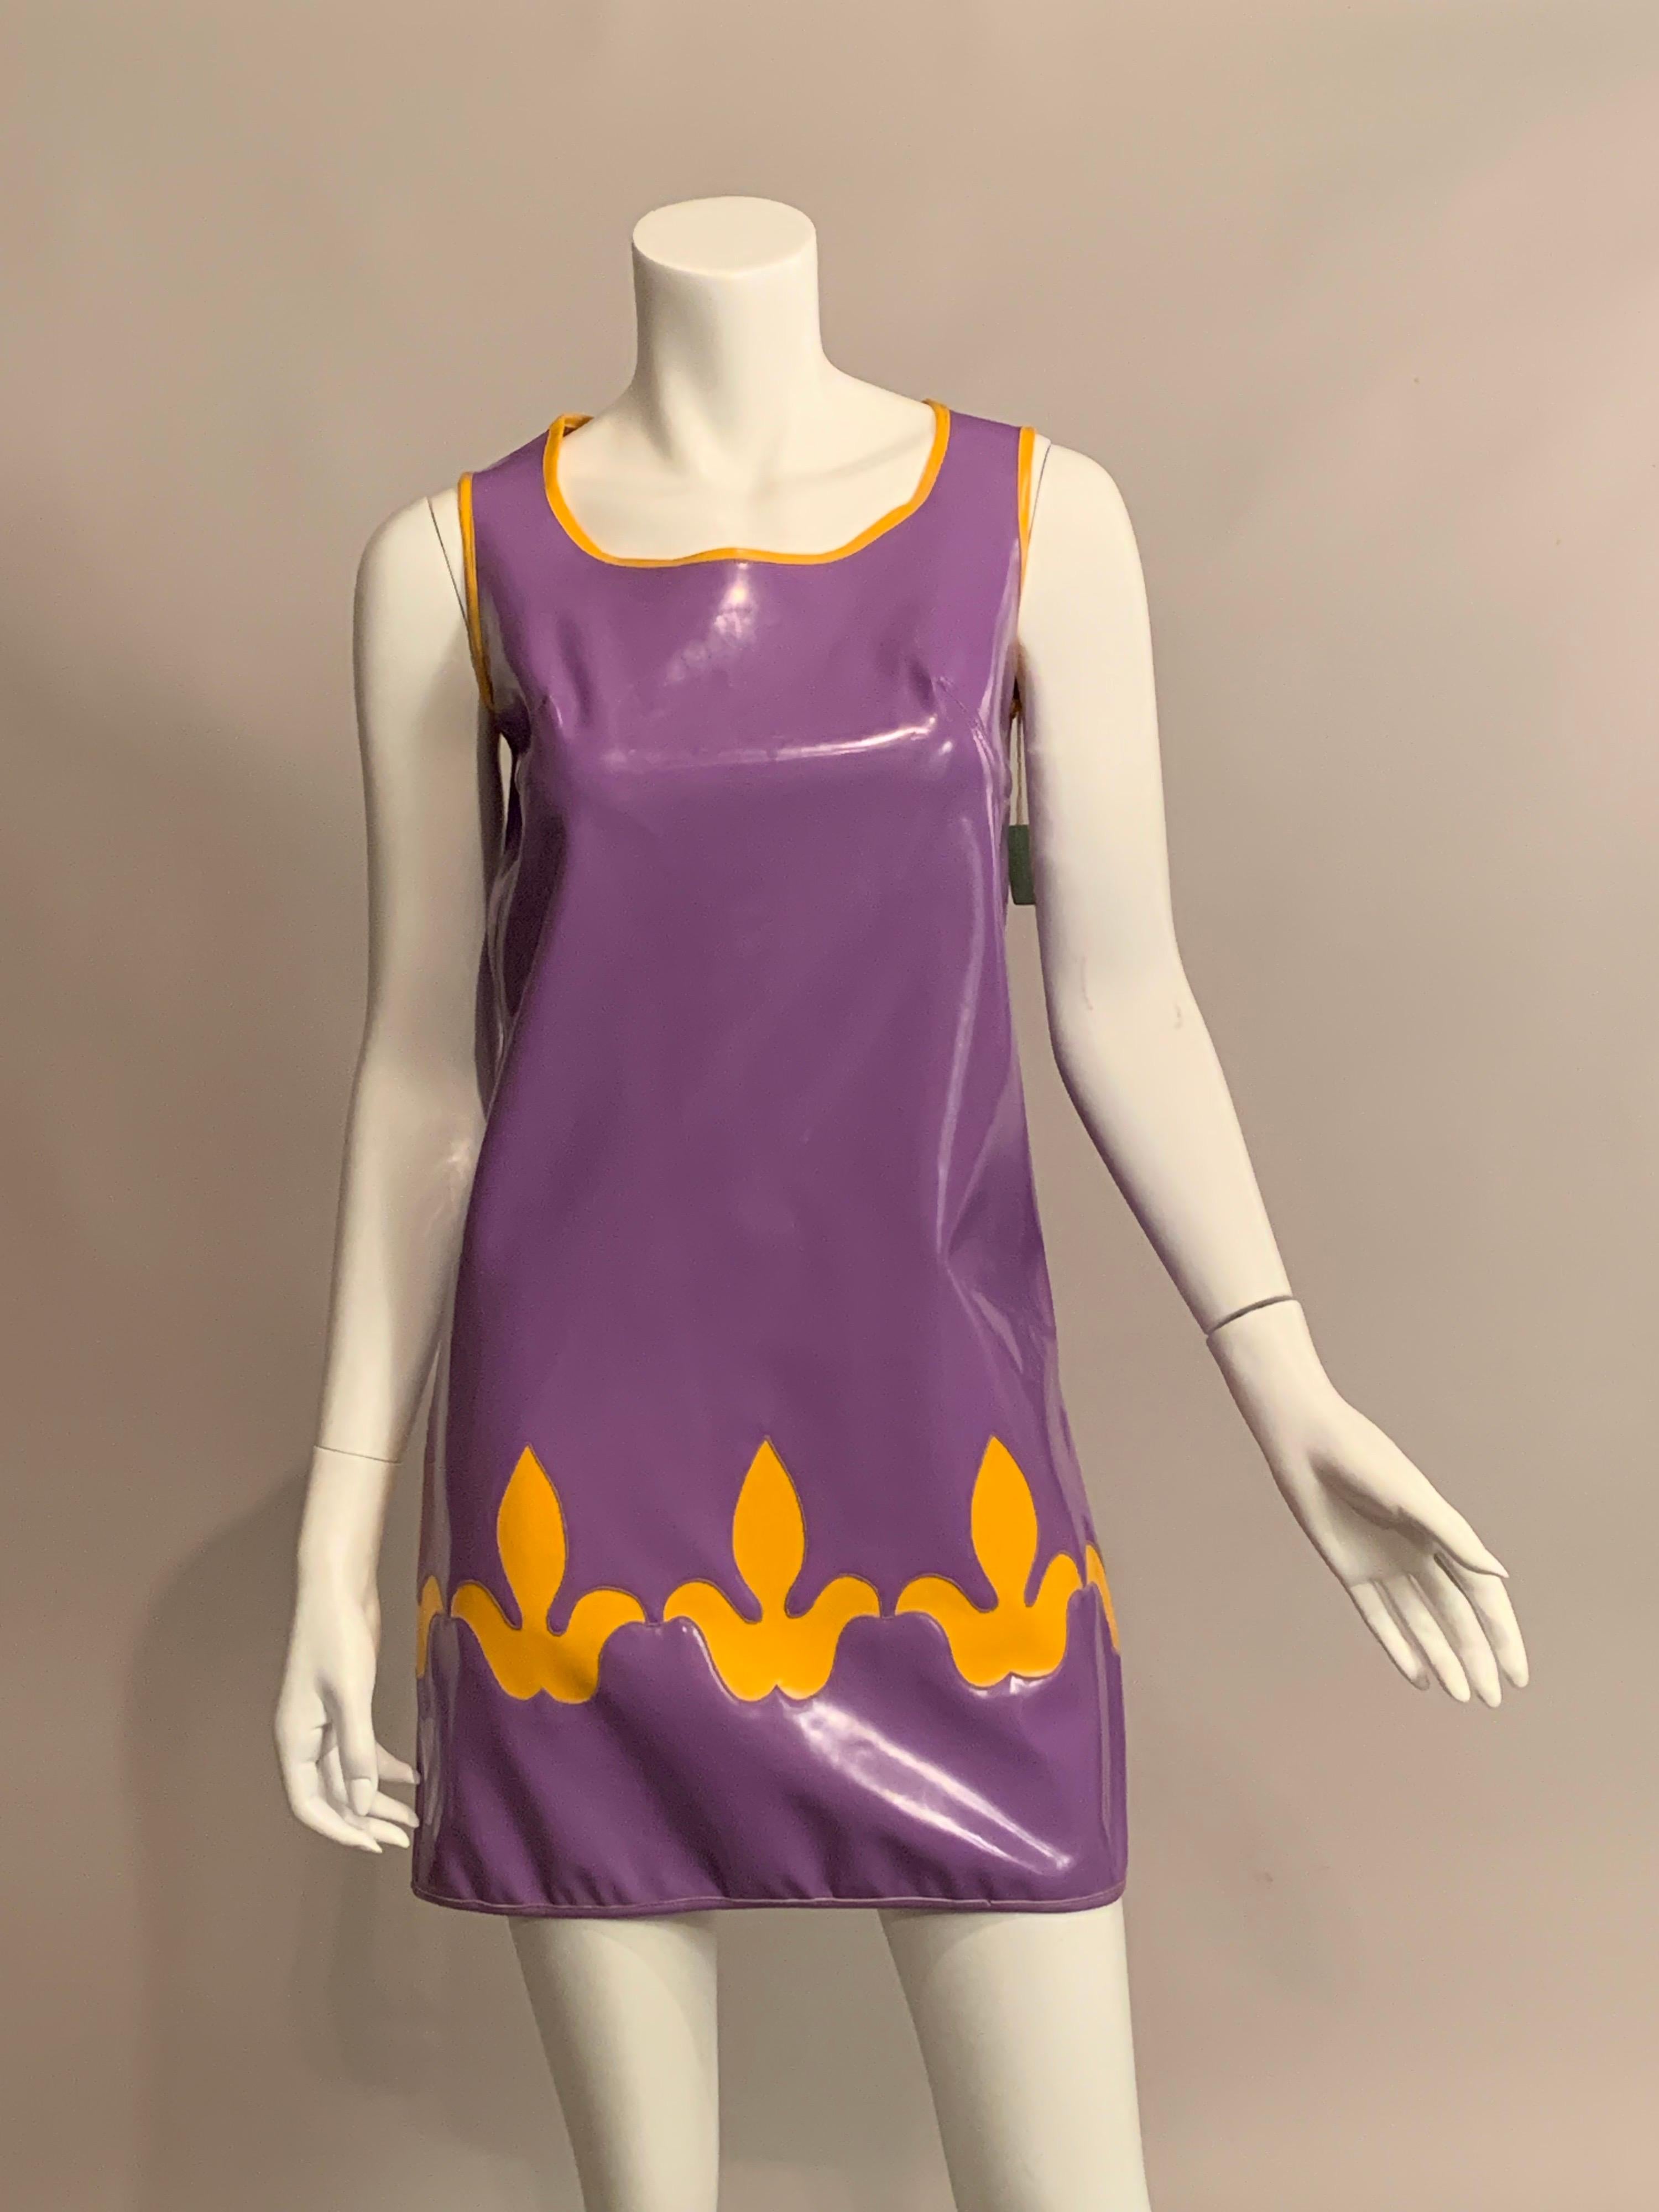 This rare and collectible lavender and yellow vinyl dress was designed by British Designers Tuffin and Foale circa 1968.  They had signed a three year contract with American company Puritan Fashions for their new division called Youthquake.  